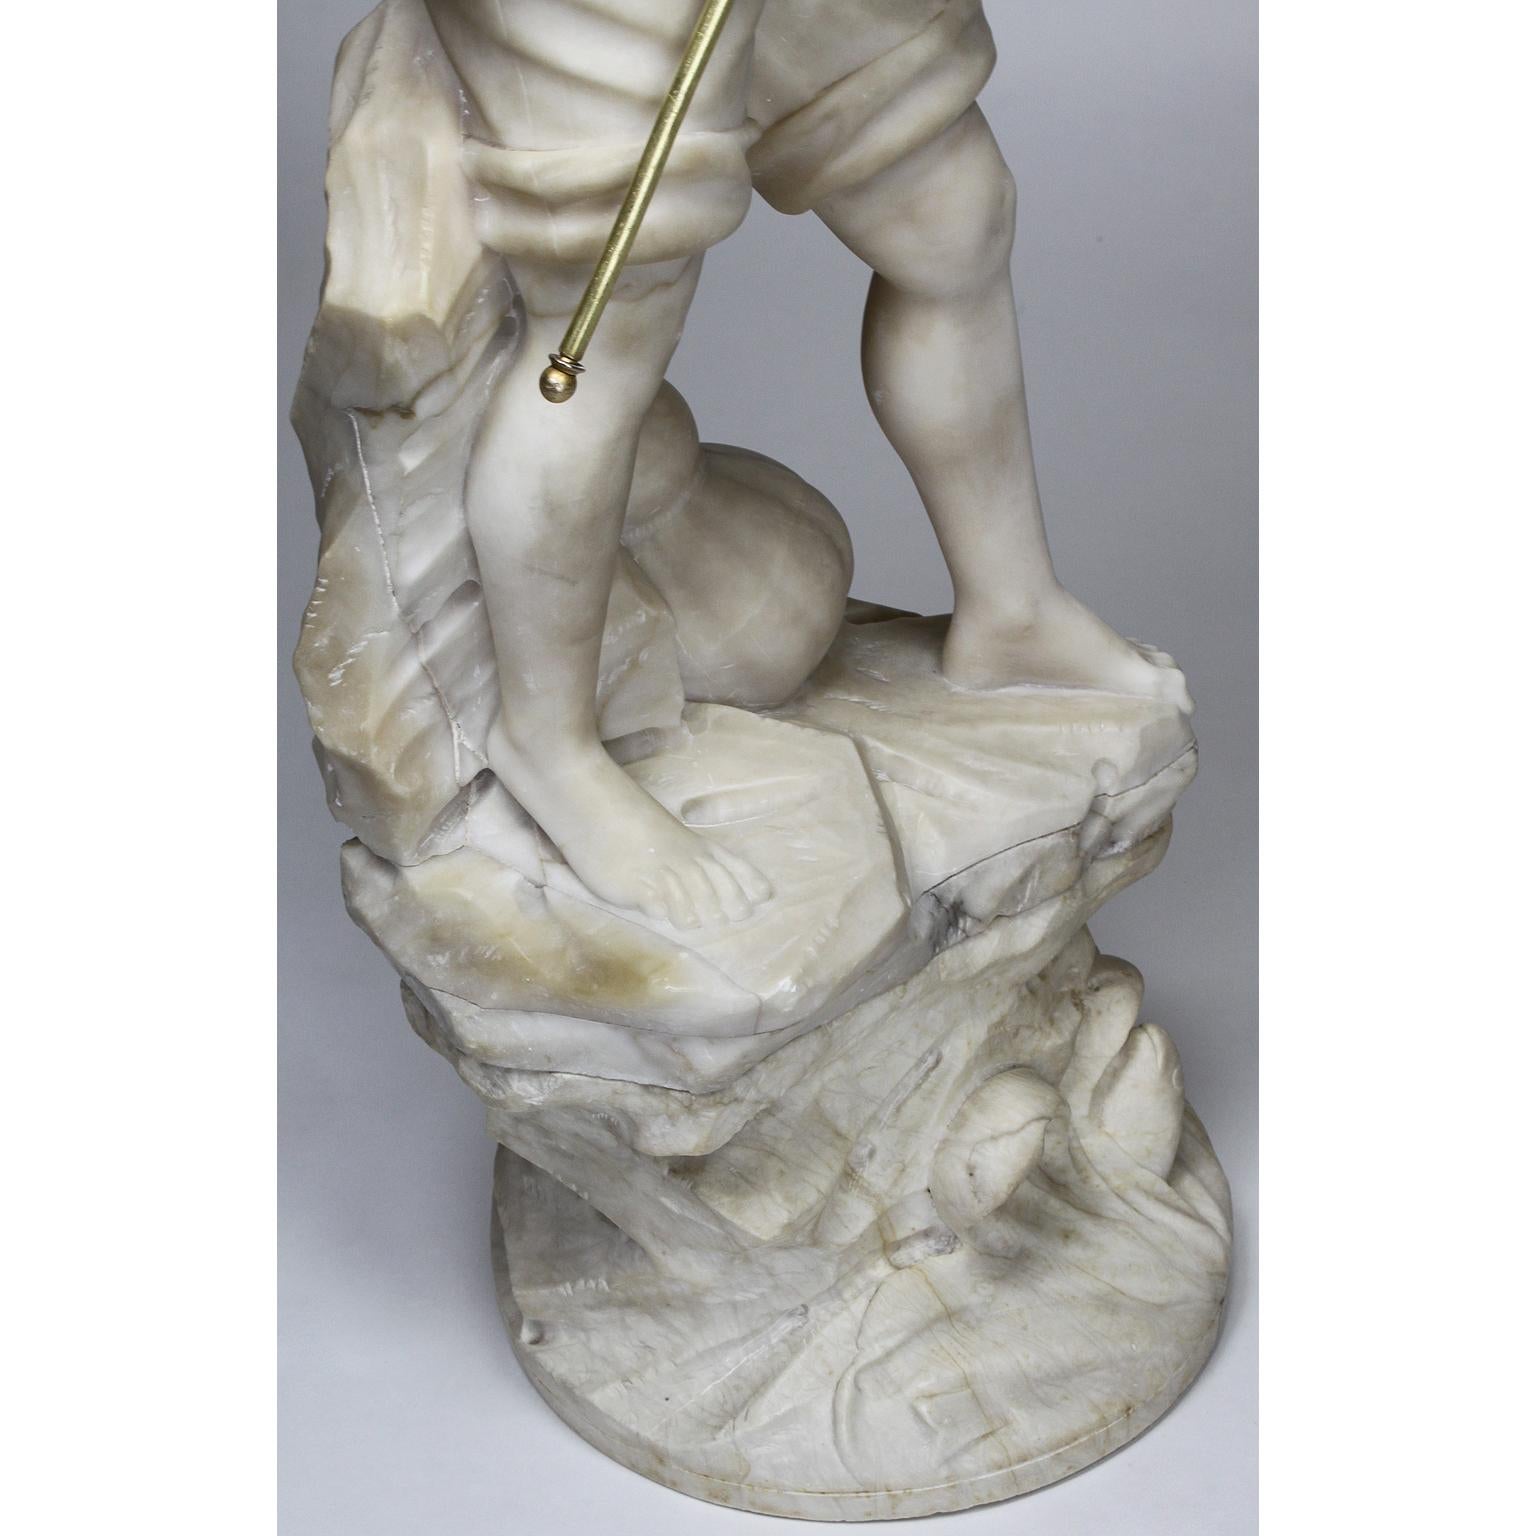 Charming Italian 19th-20th Century Carved Alabaster Figure of a Fisher Boy For Sale 7